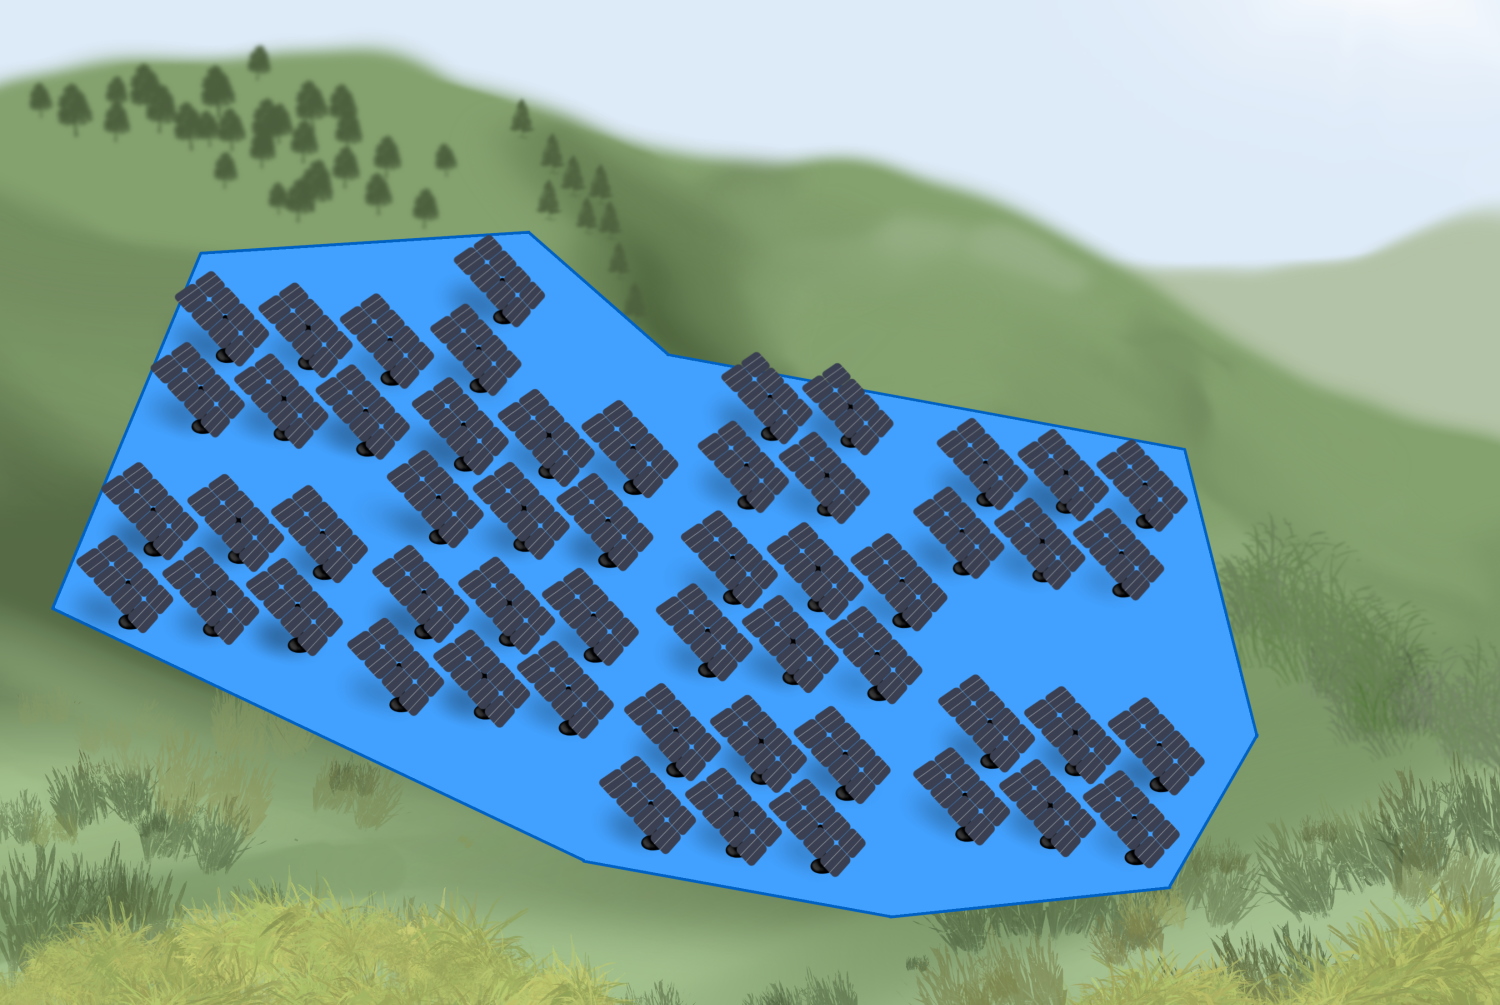 Example of planarized PV footprint